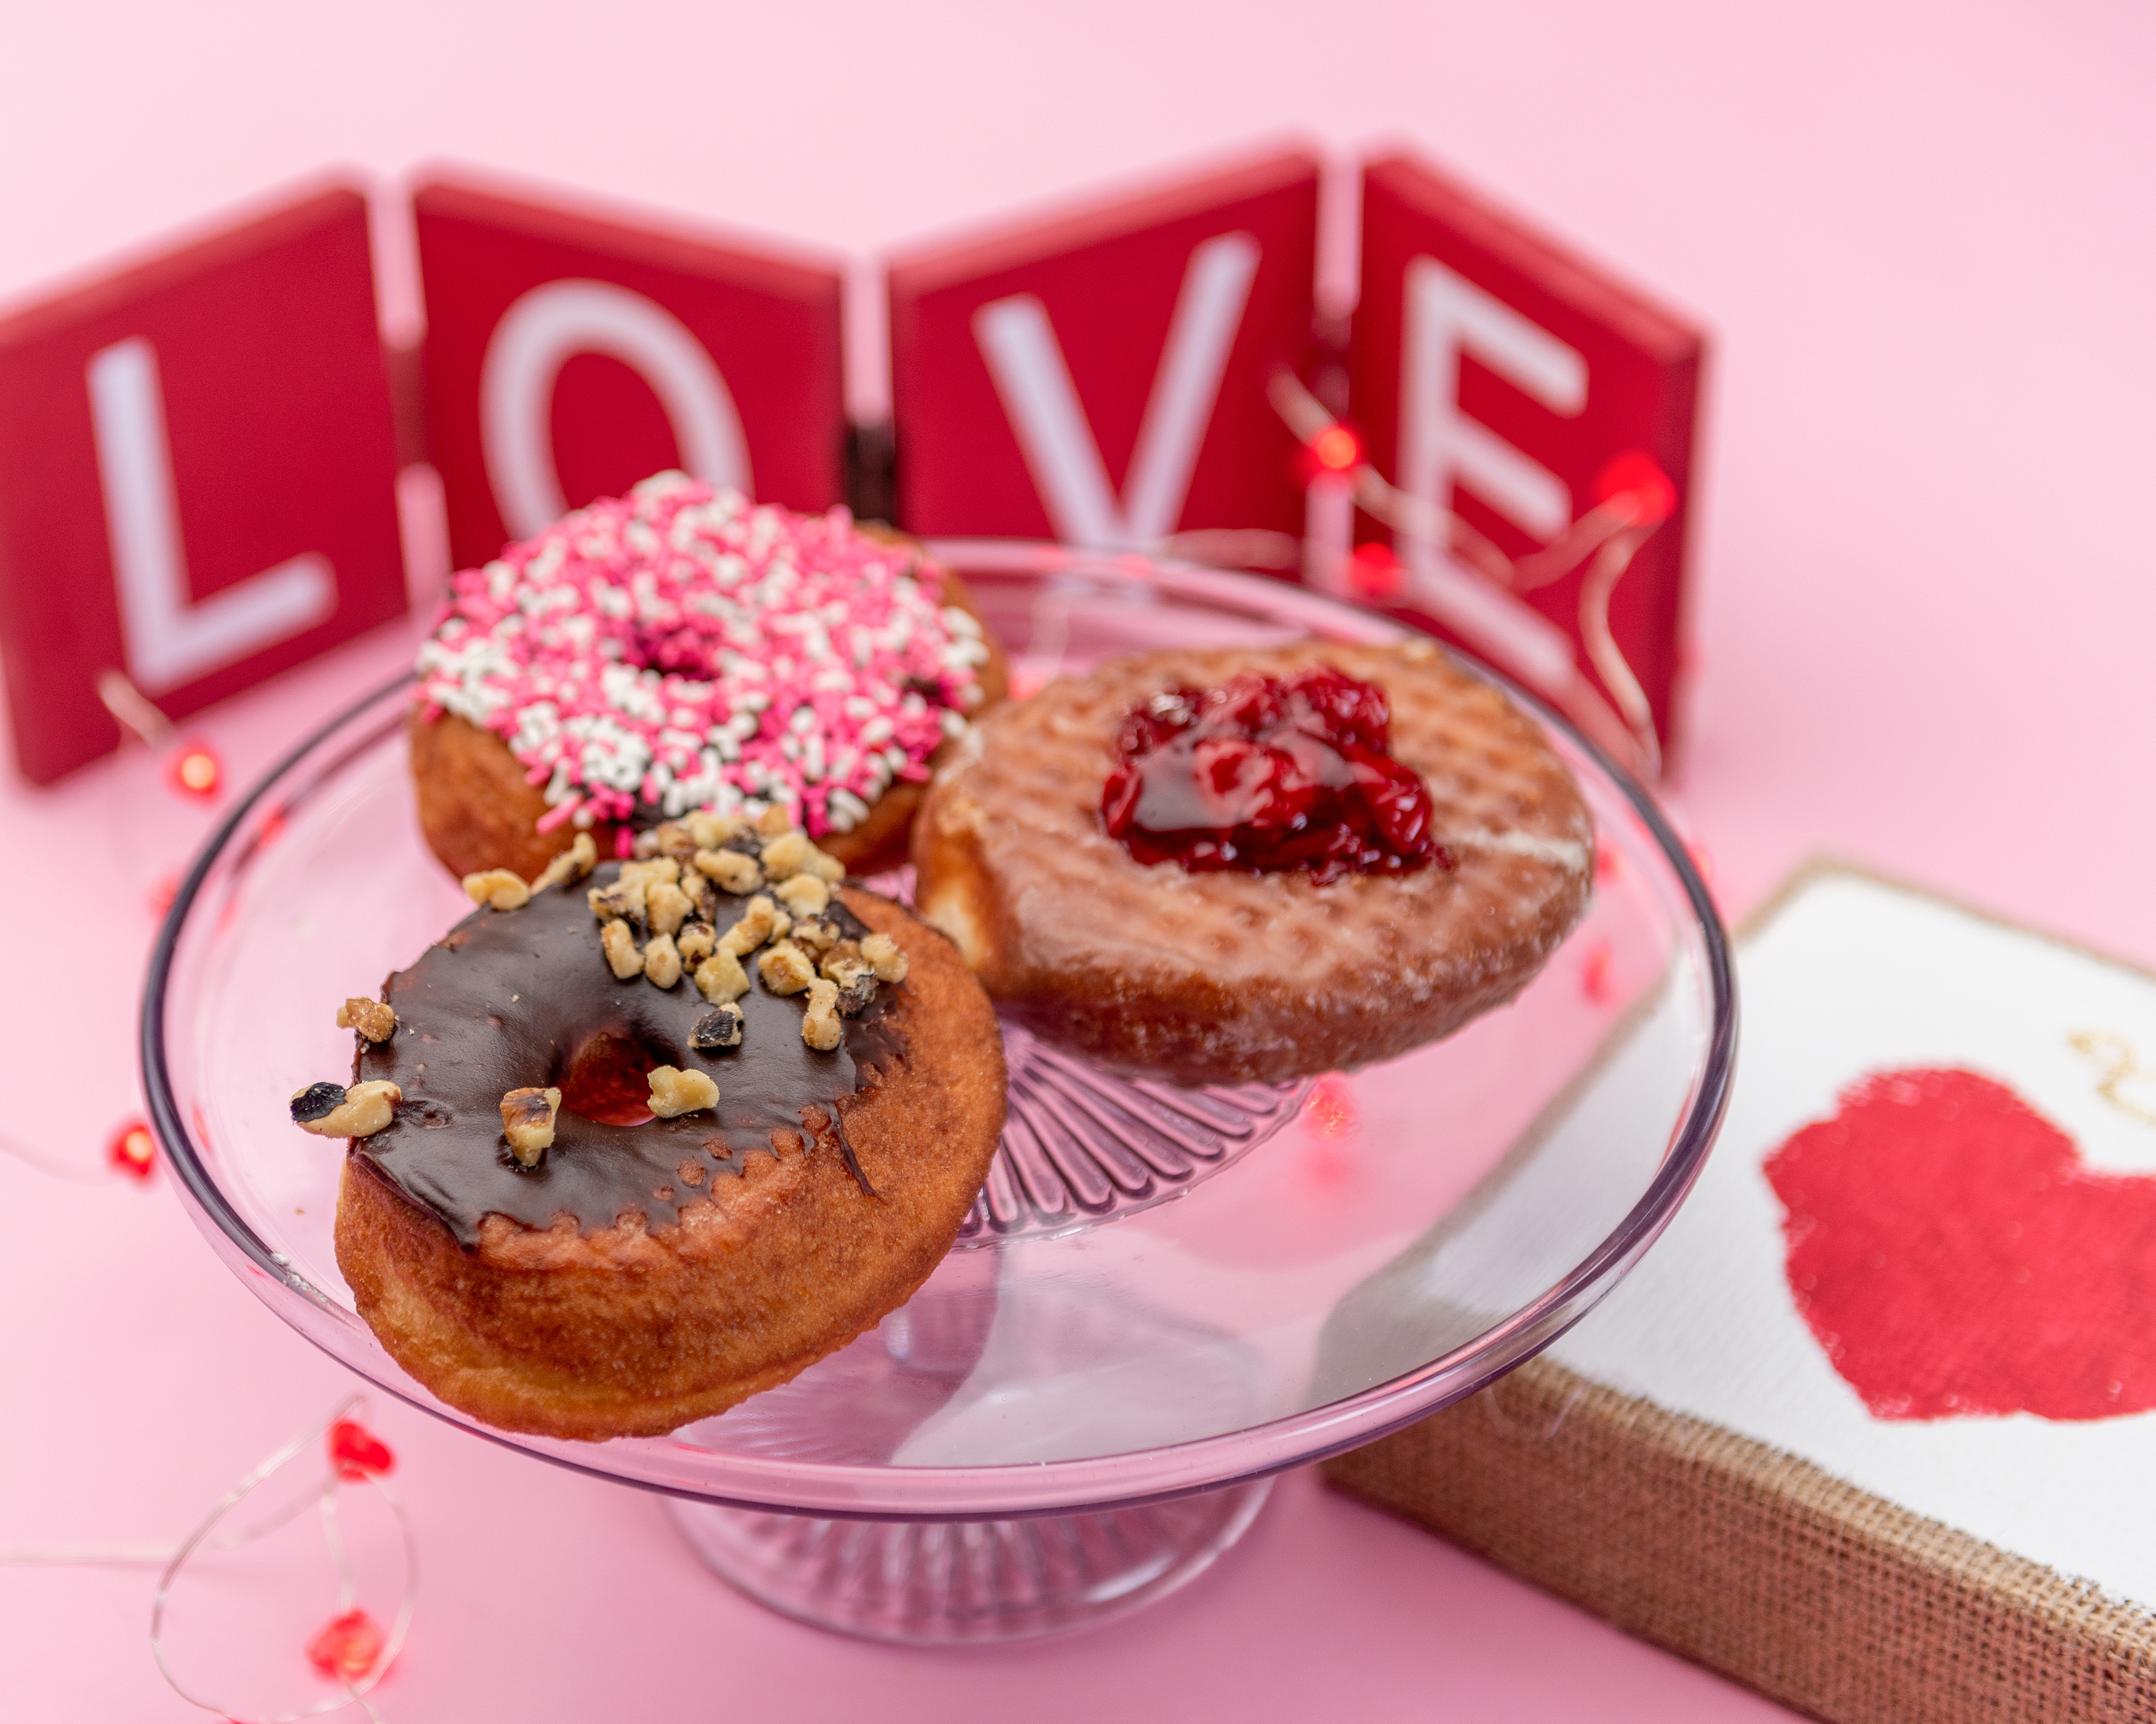 Valentines day donuts and pastrys at Cle Elum Bakery, commercial photography by Mary Maletzke